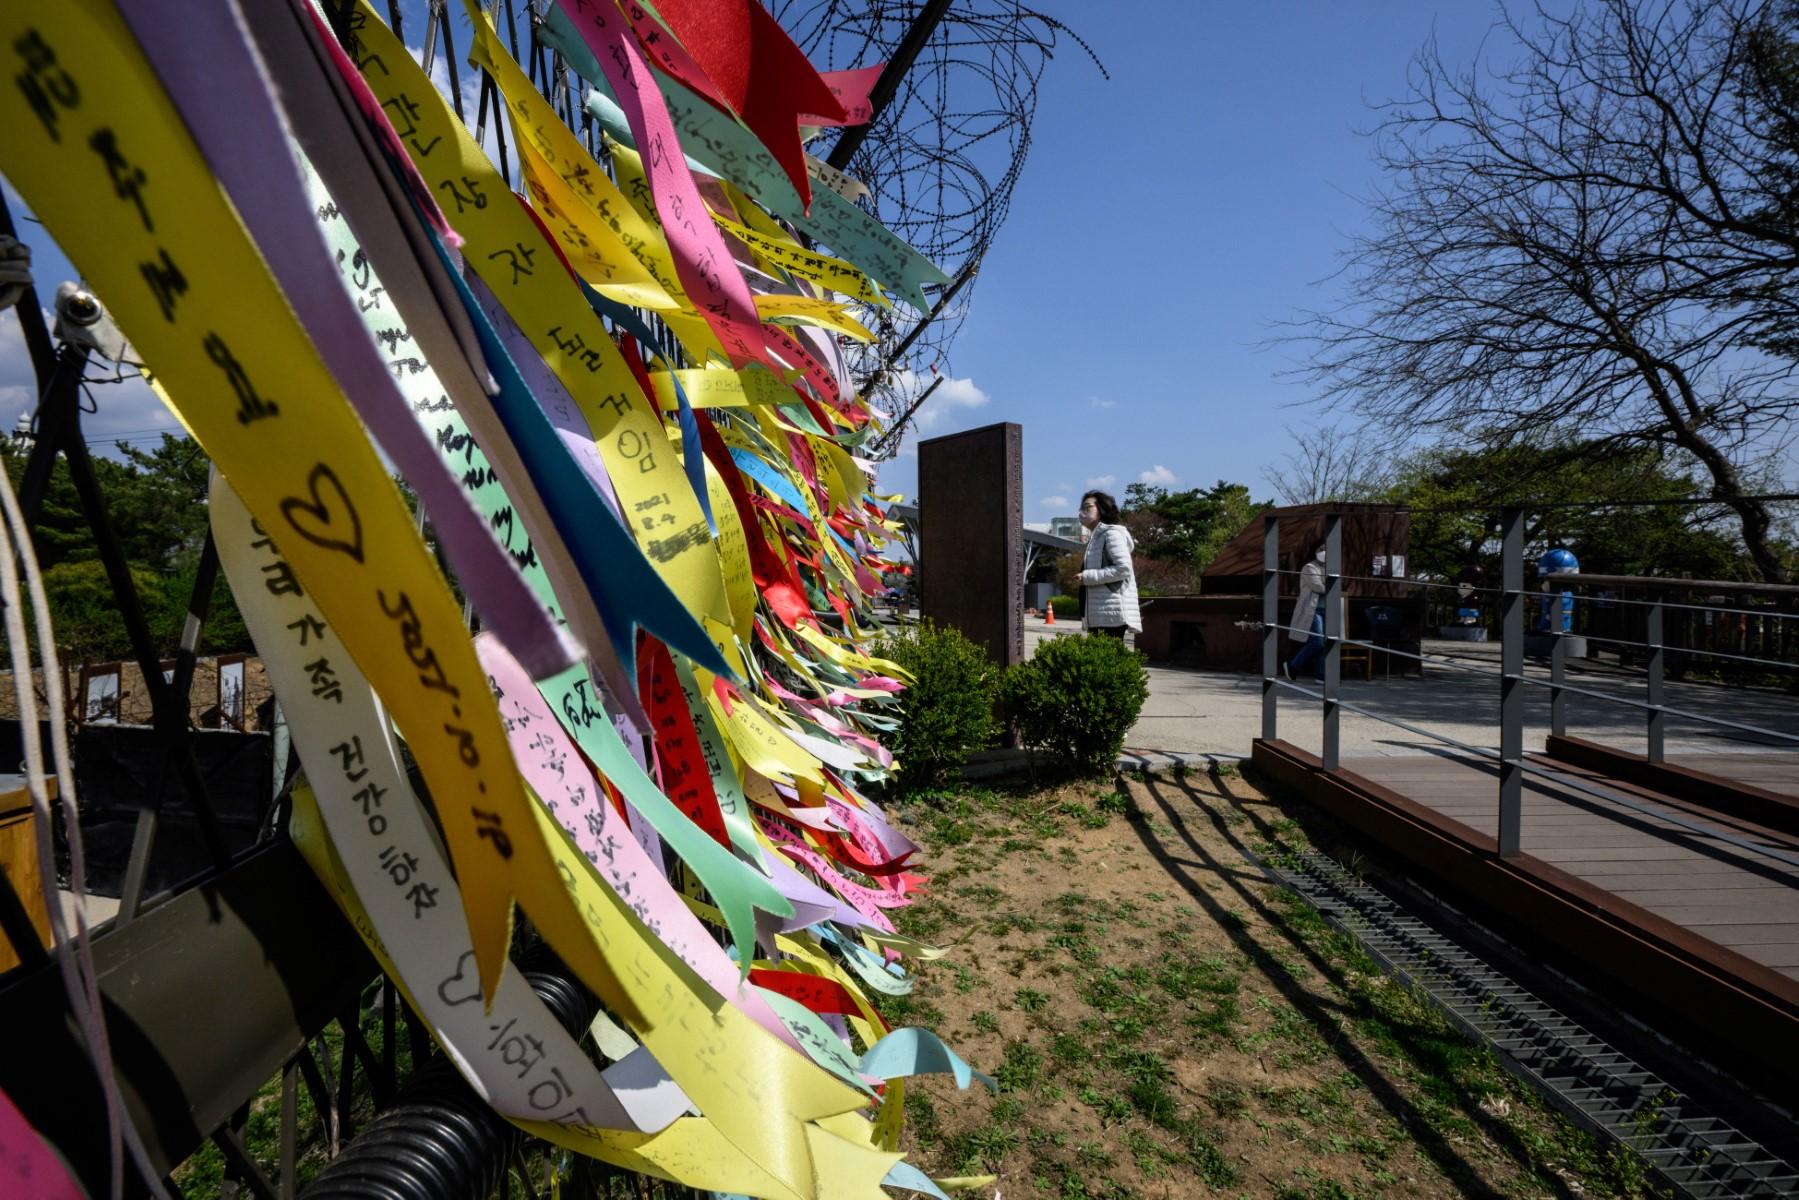 A visitor looks at an information board near a fence adorned with ribbons with messages written on them, at the Imjingak 'peace park' near the Demilitarized Zone separating North and South Korea, in Paju on April 15. Photo: AFP